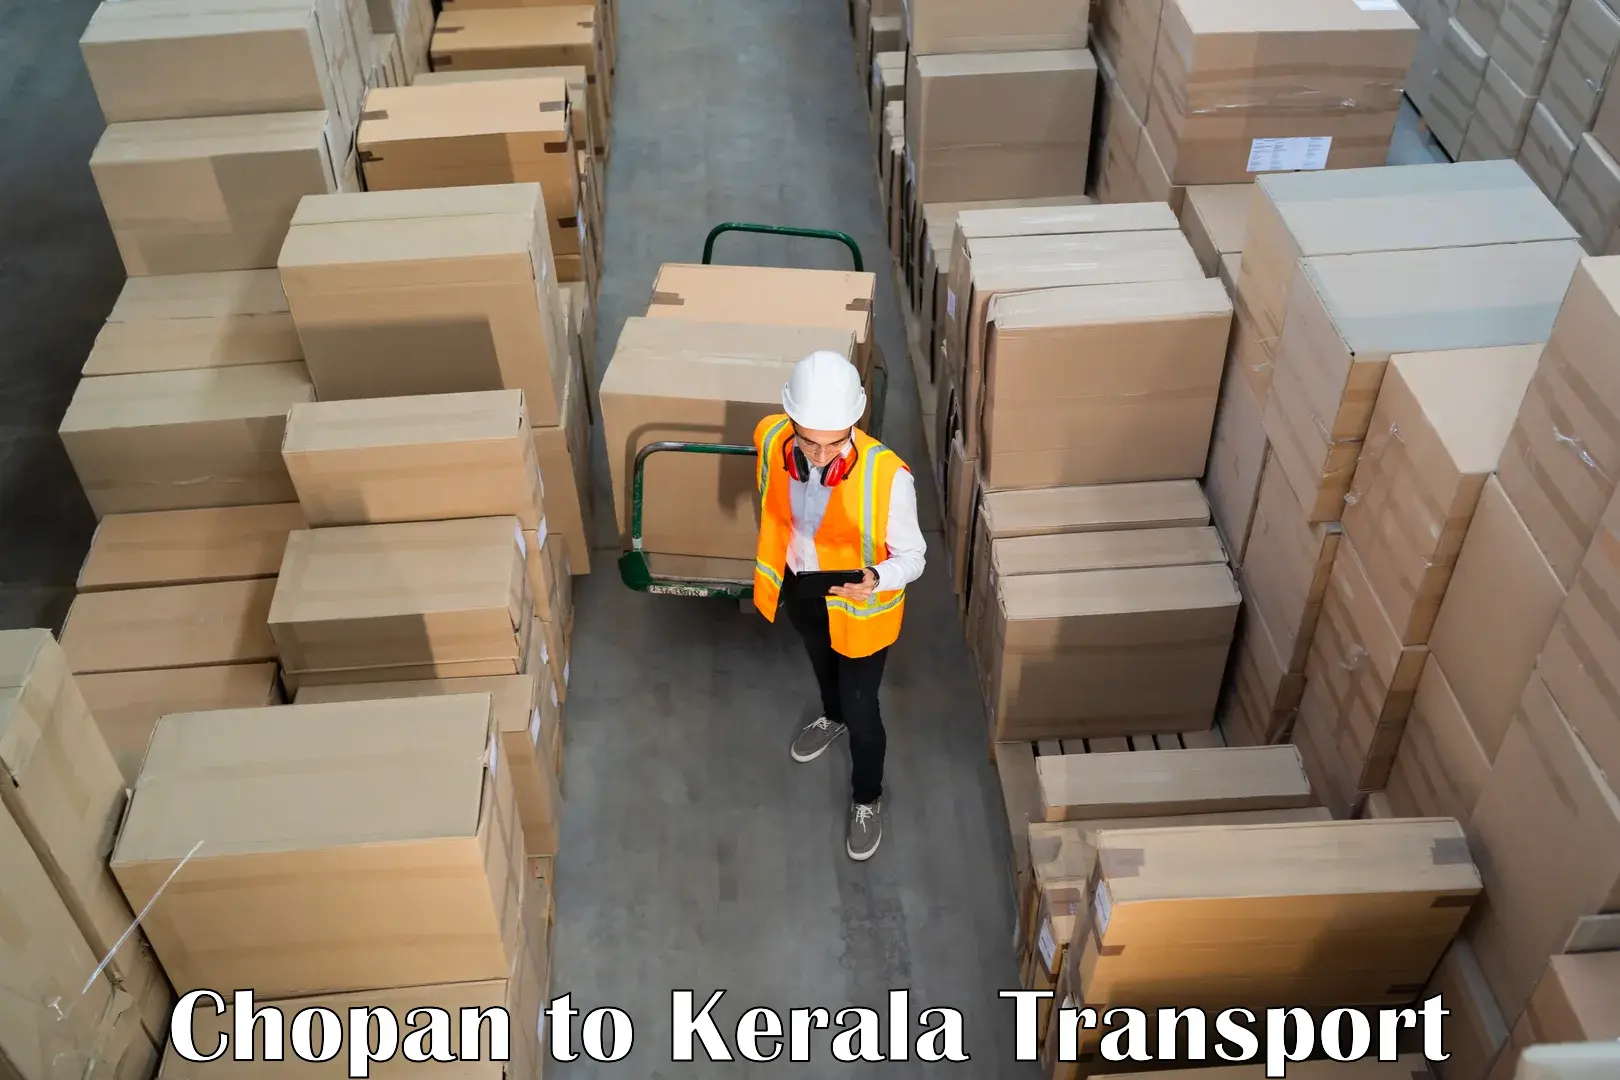 Transport bike from one state to another Chopan to Kozhikode